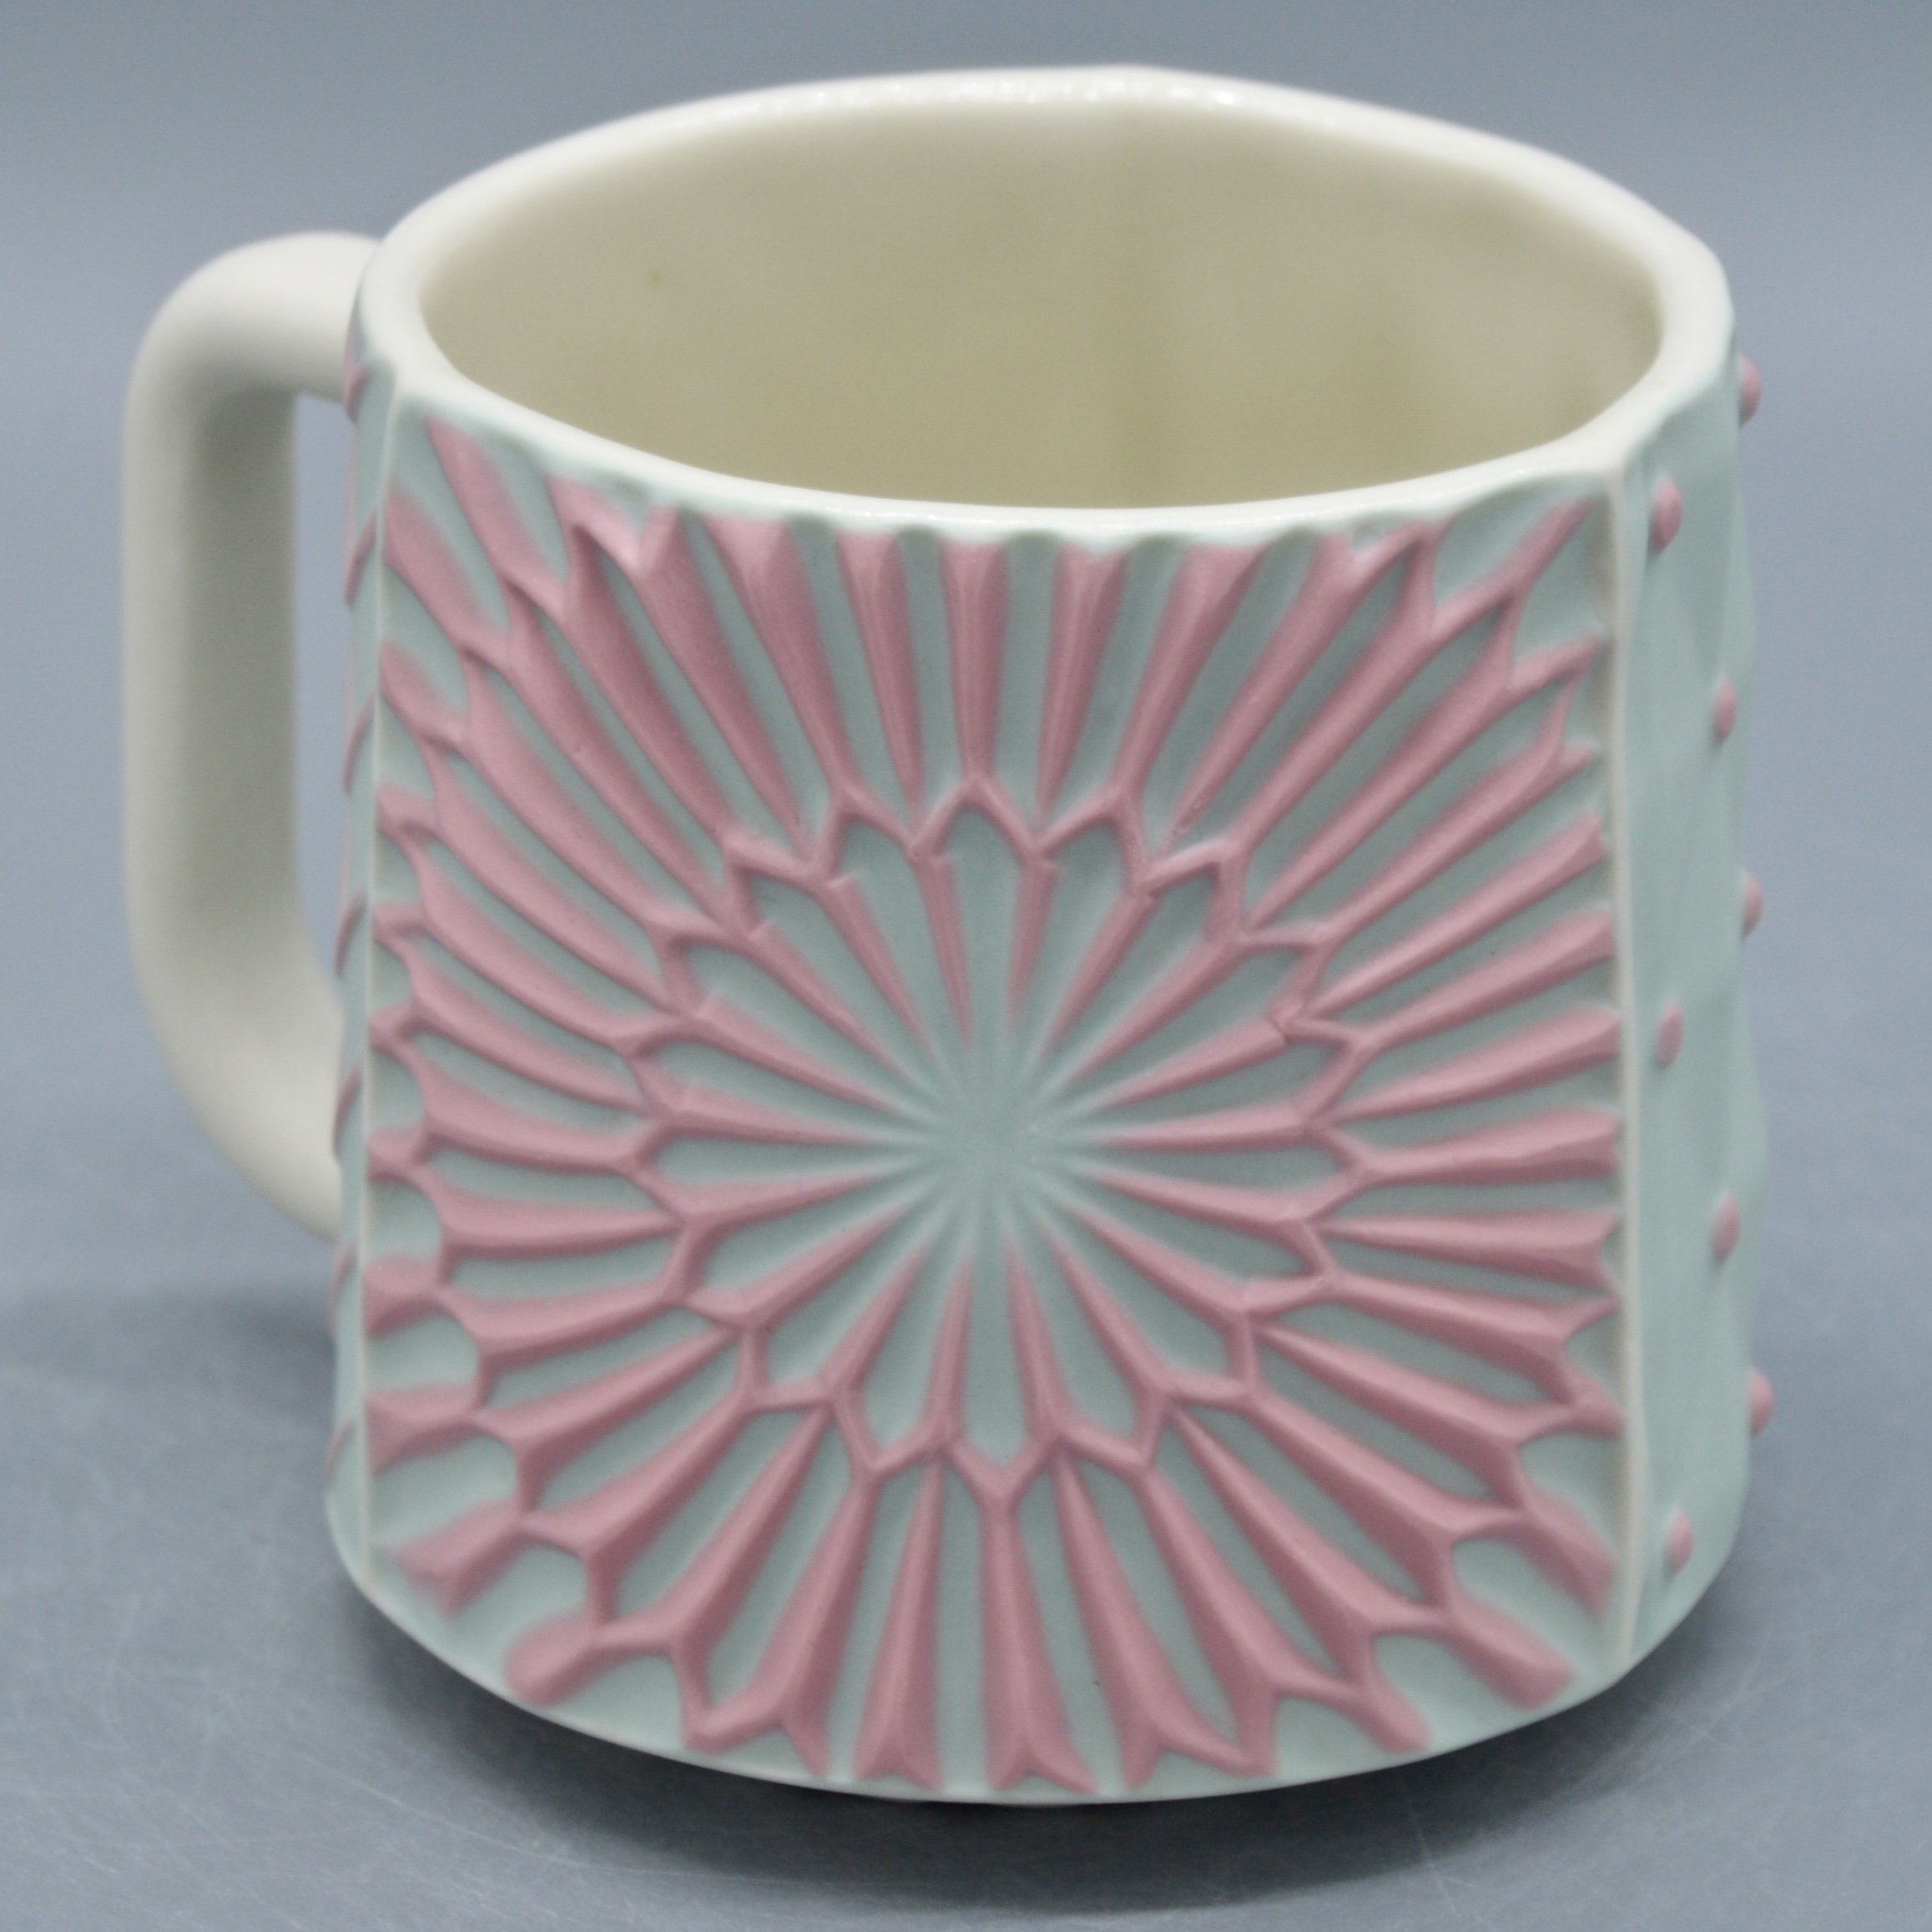 Starburst in Light Turquoise and Pink